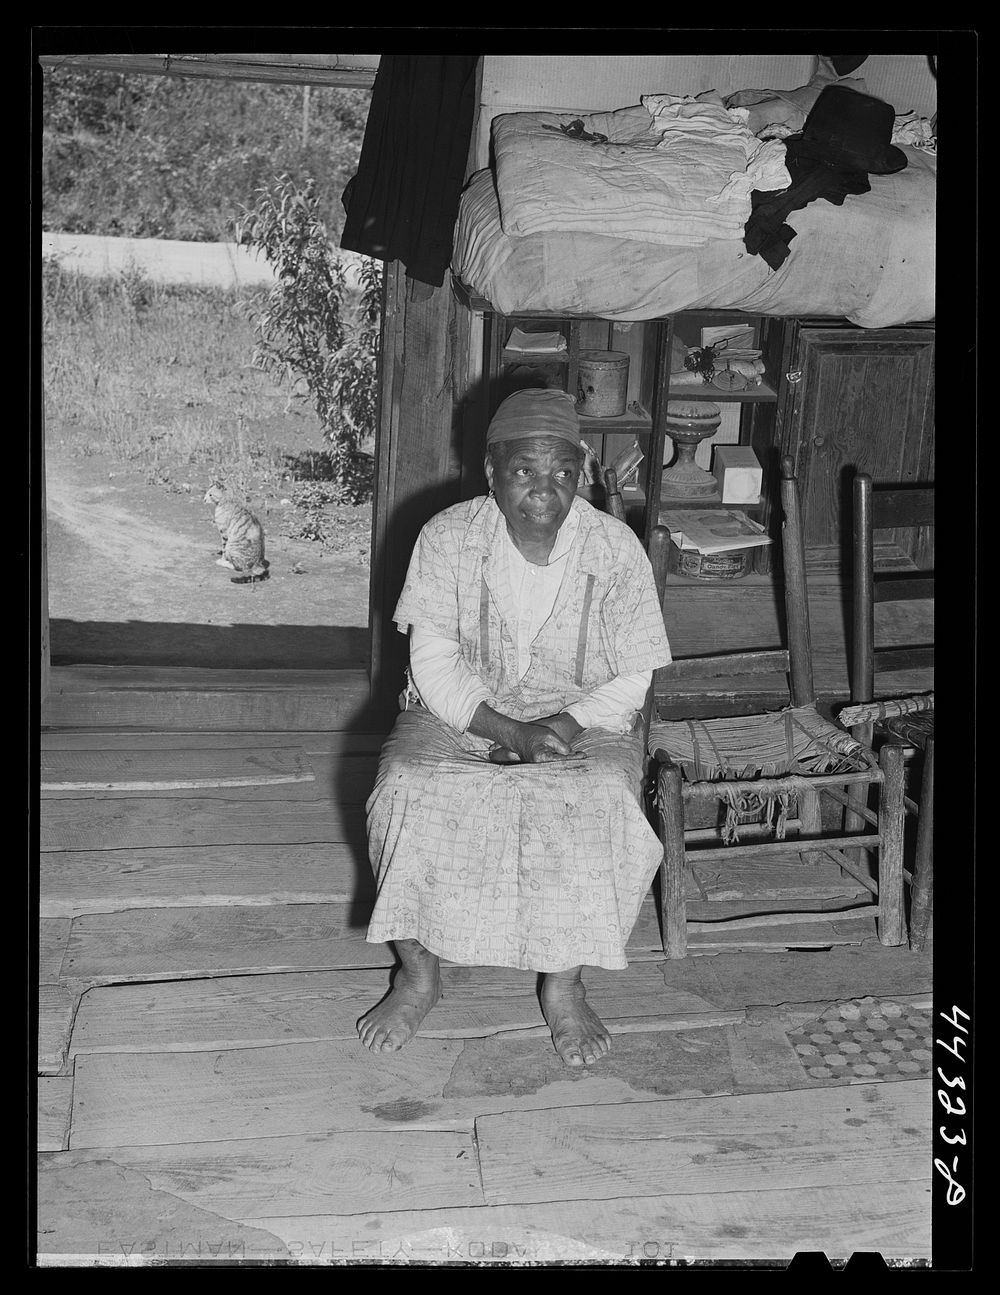  midwife in her house near Siloam, Greene County, Georgia. Sourced from the Library of Congress.